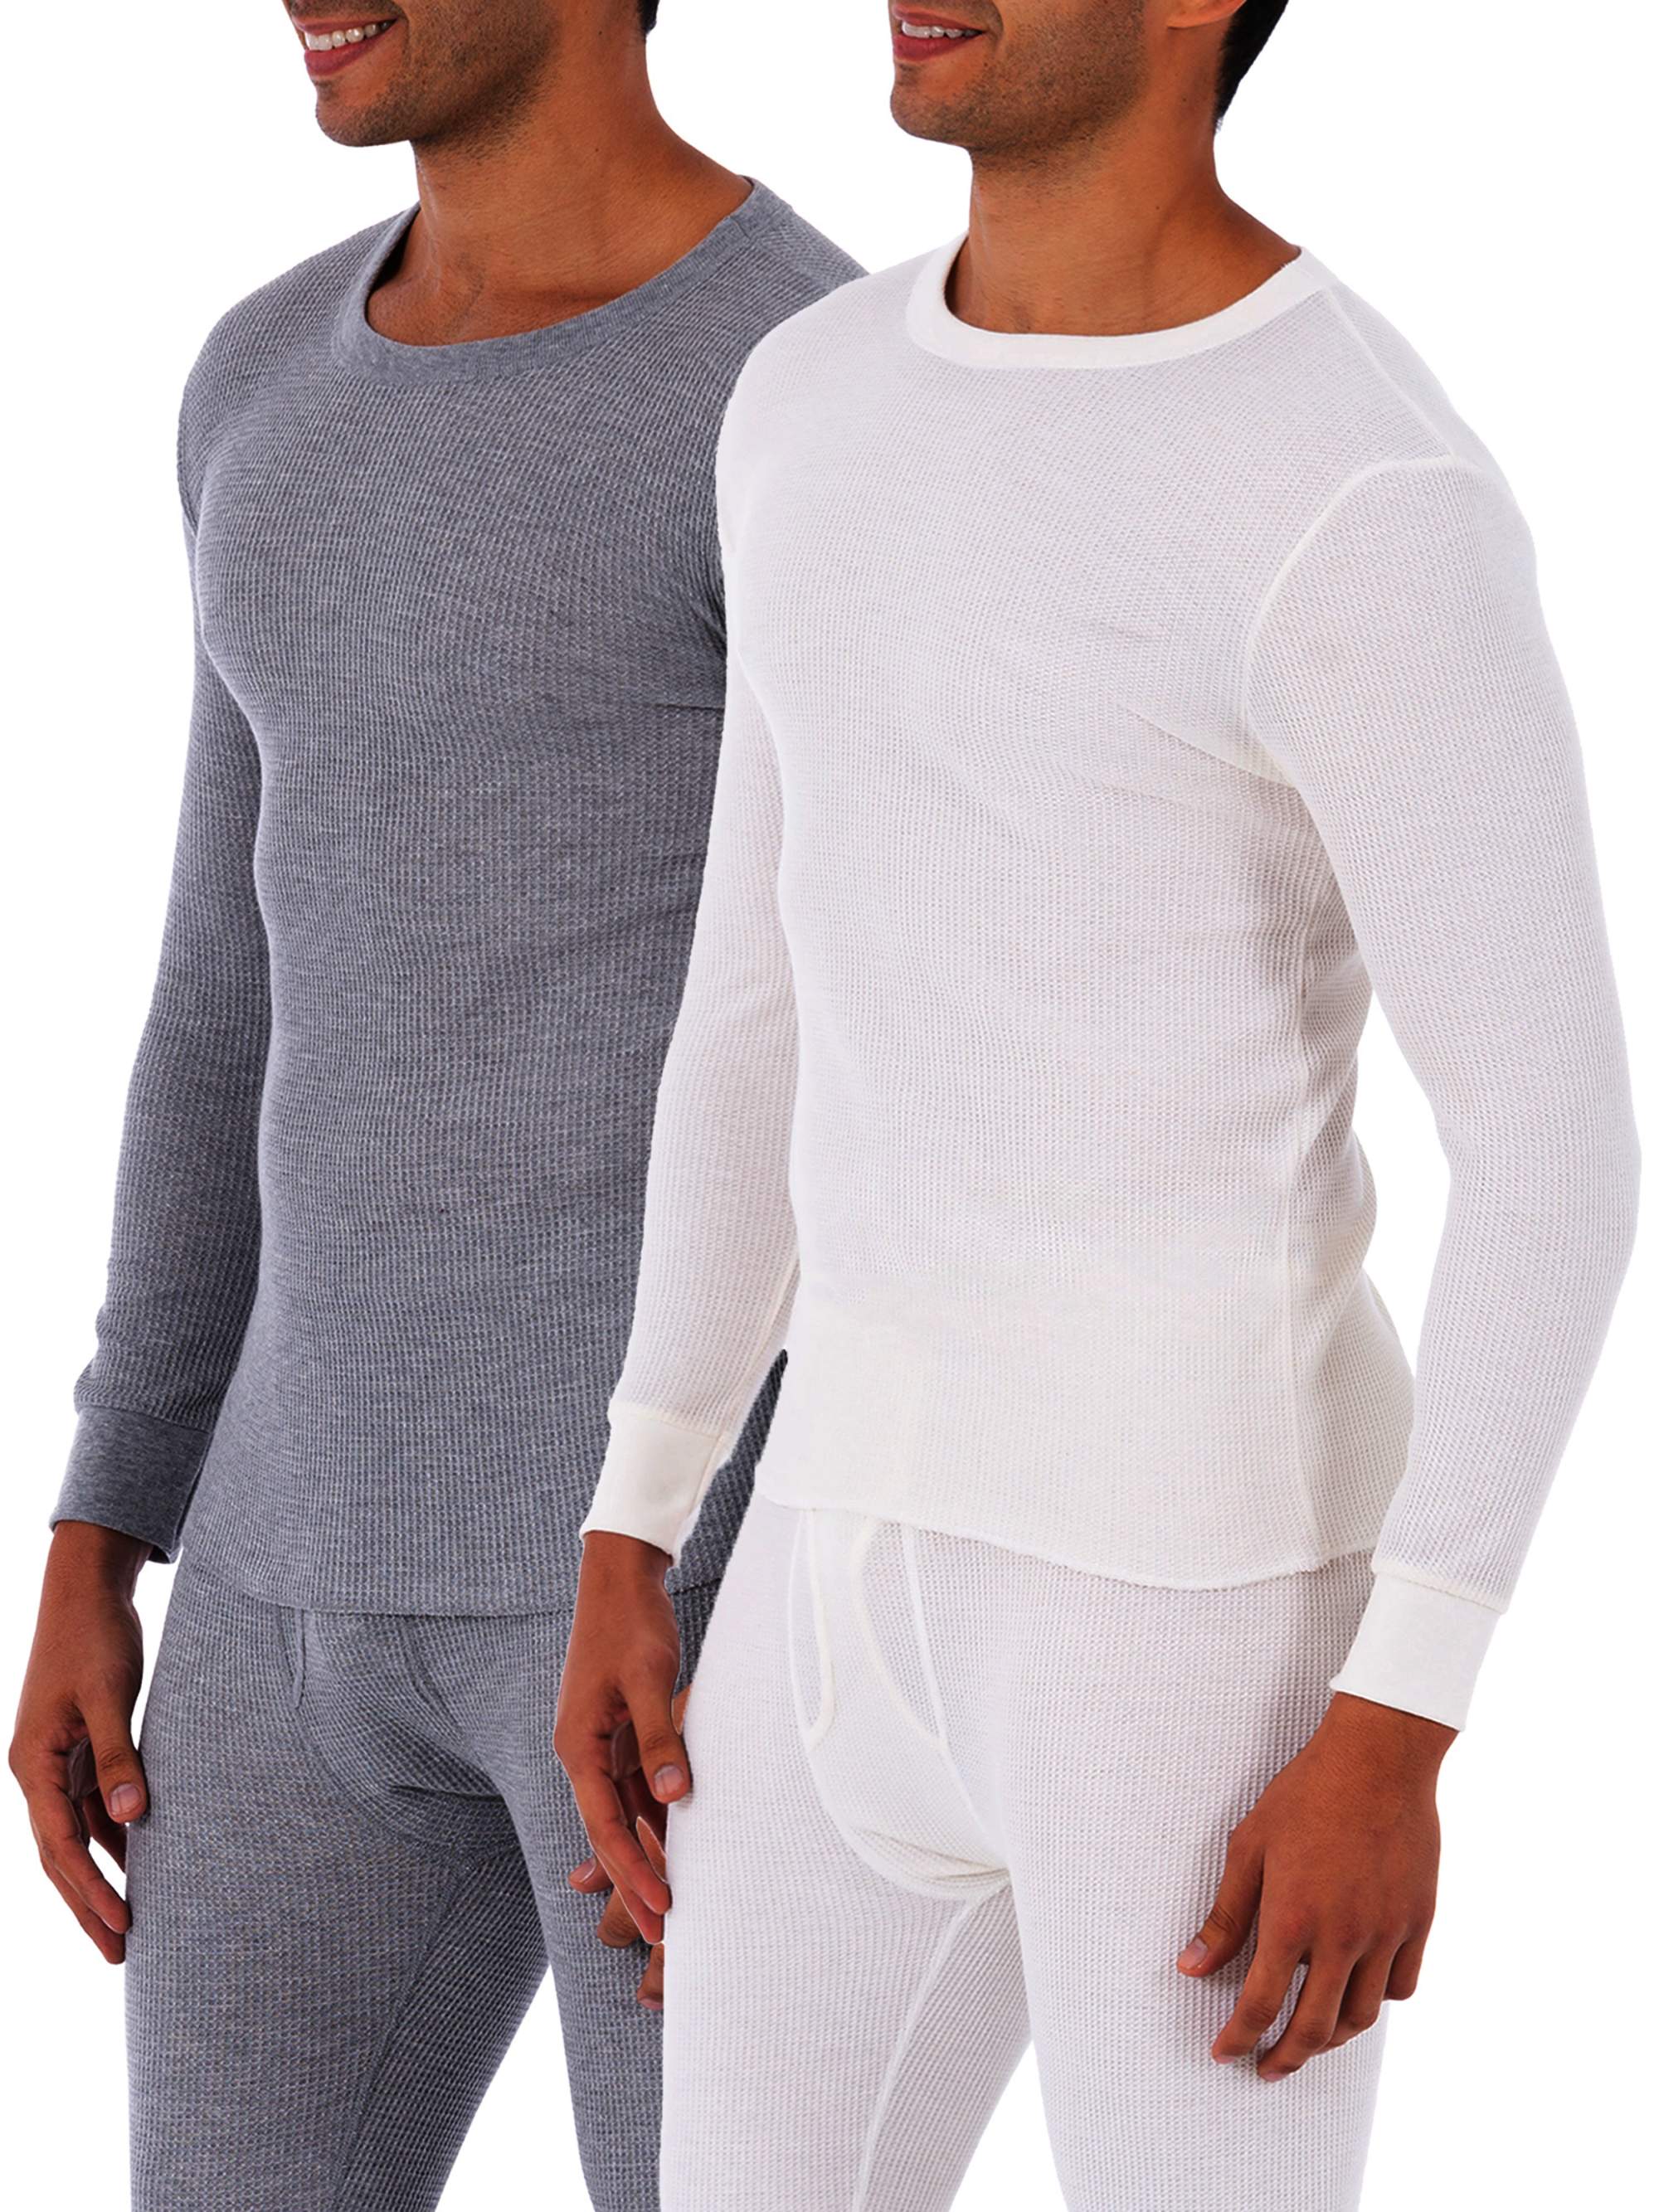 Fruit of the Loom SUPER VALUE Men's Core Waffle Thermal 2 Pack Top - image 1 of 11